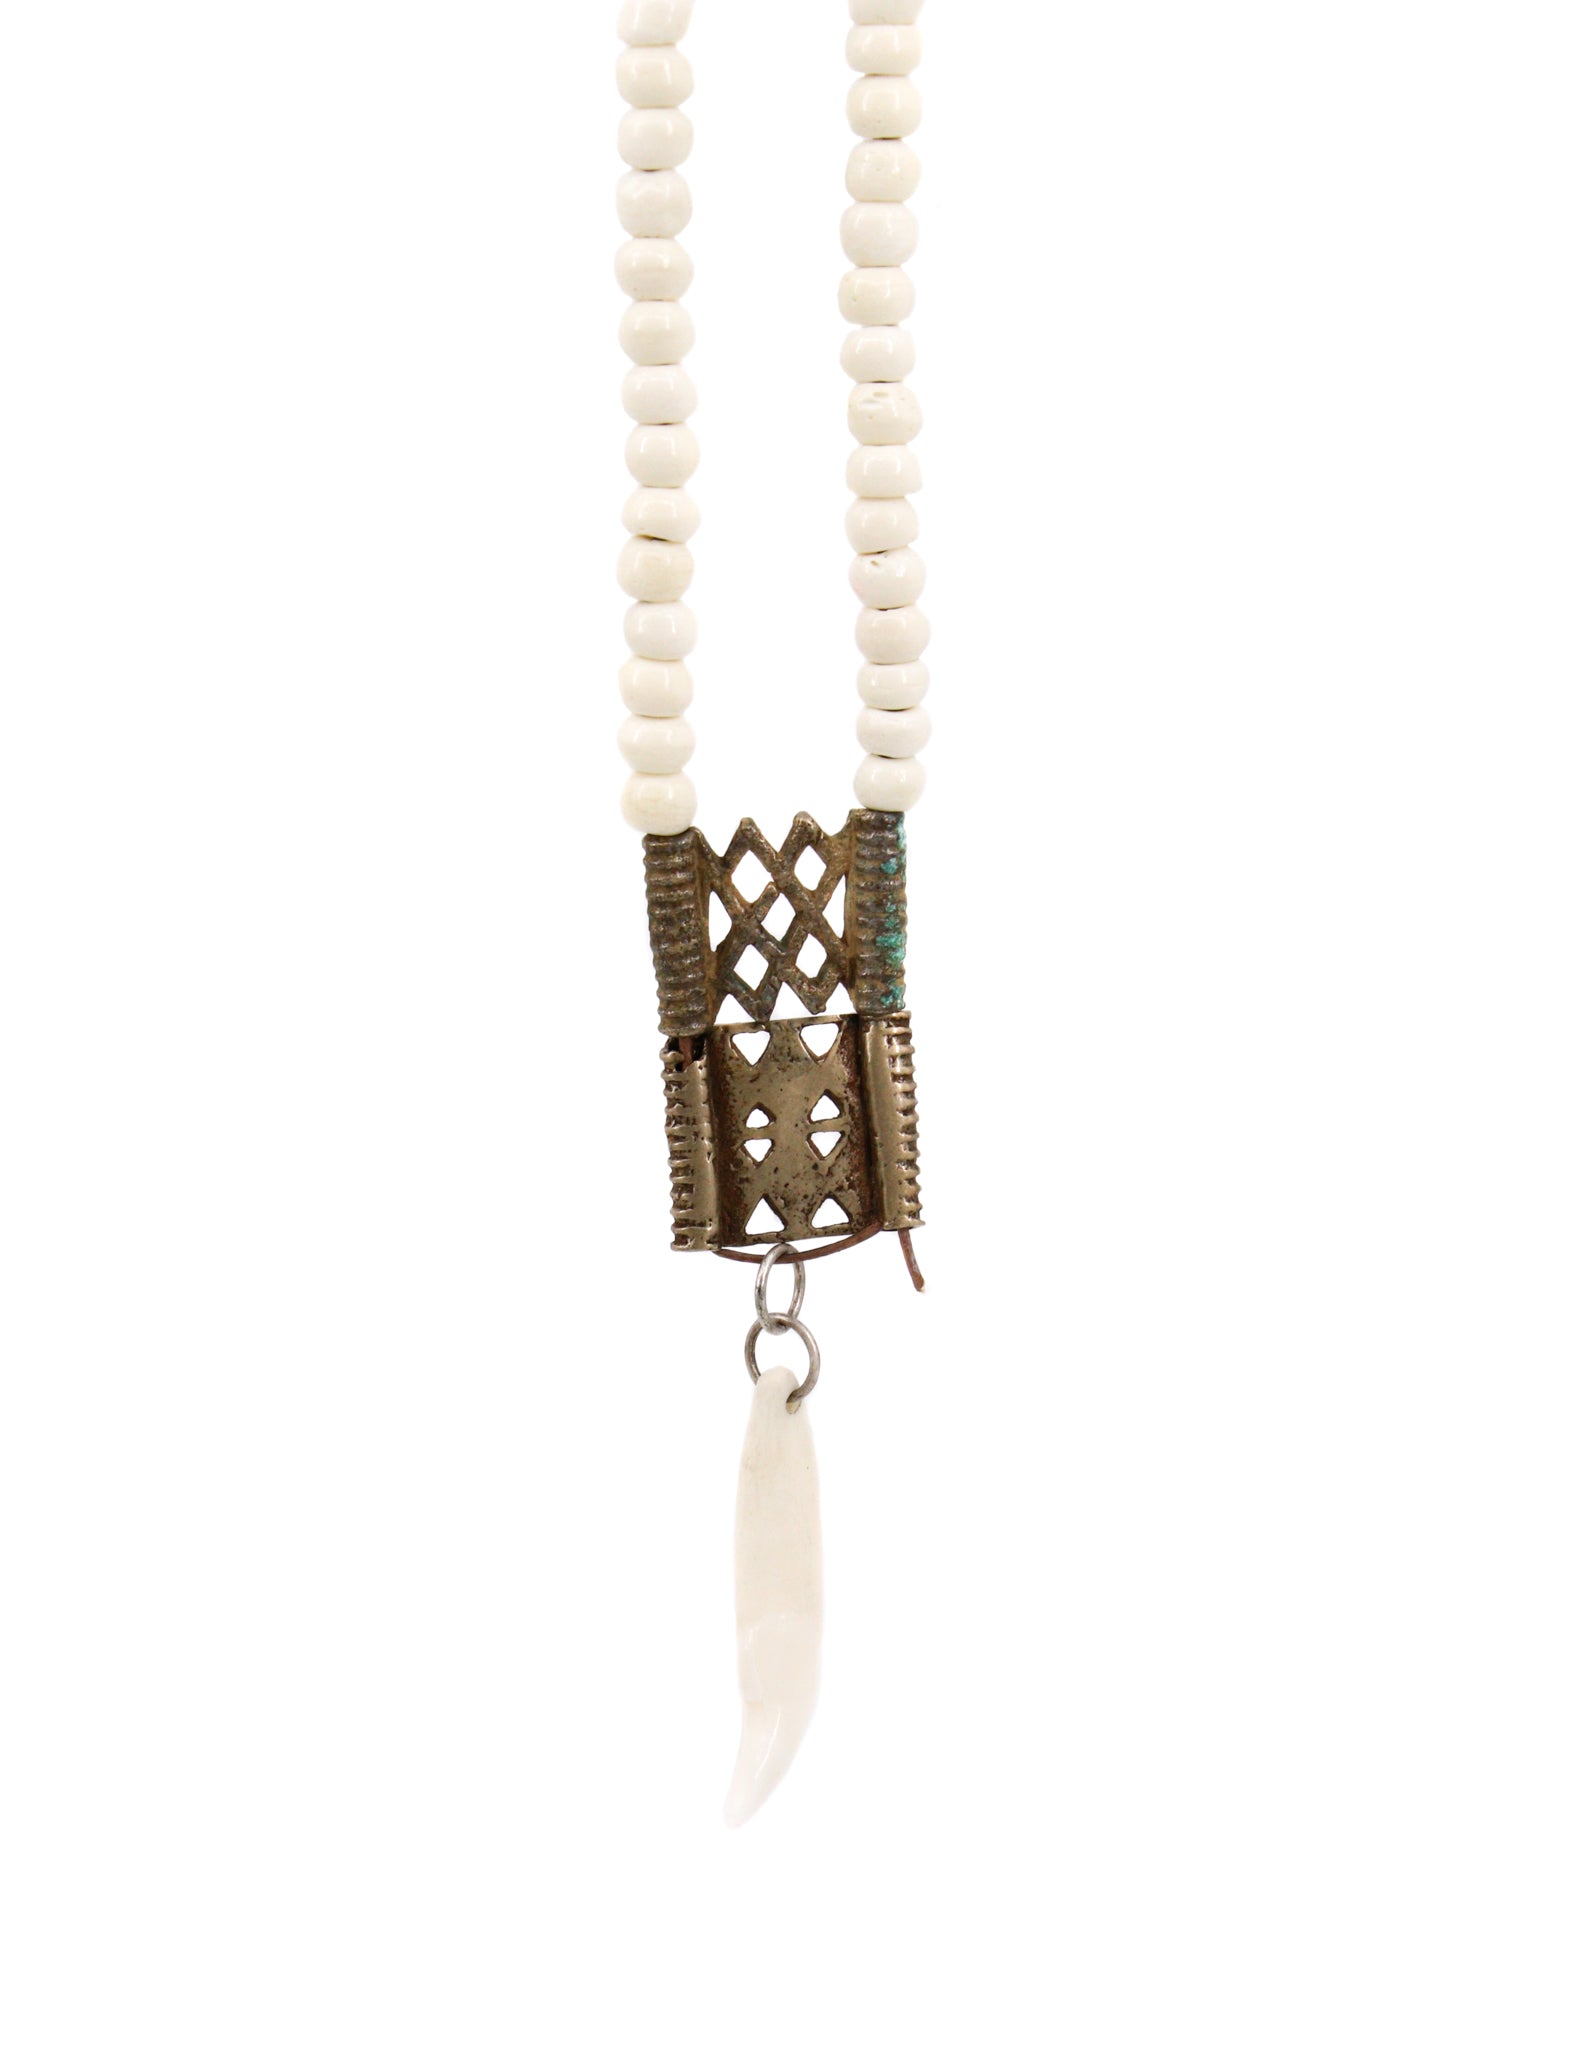 Bone beads on leather necklace